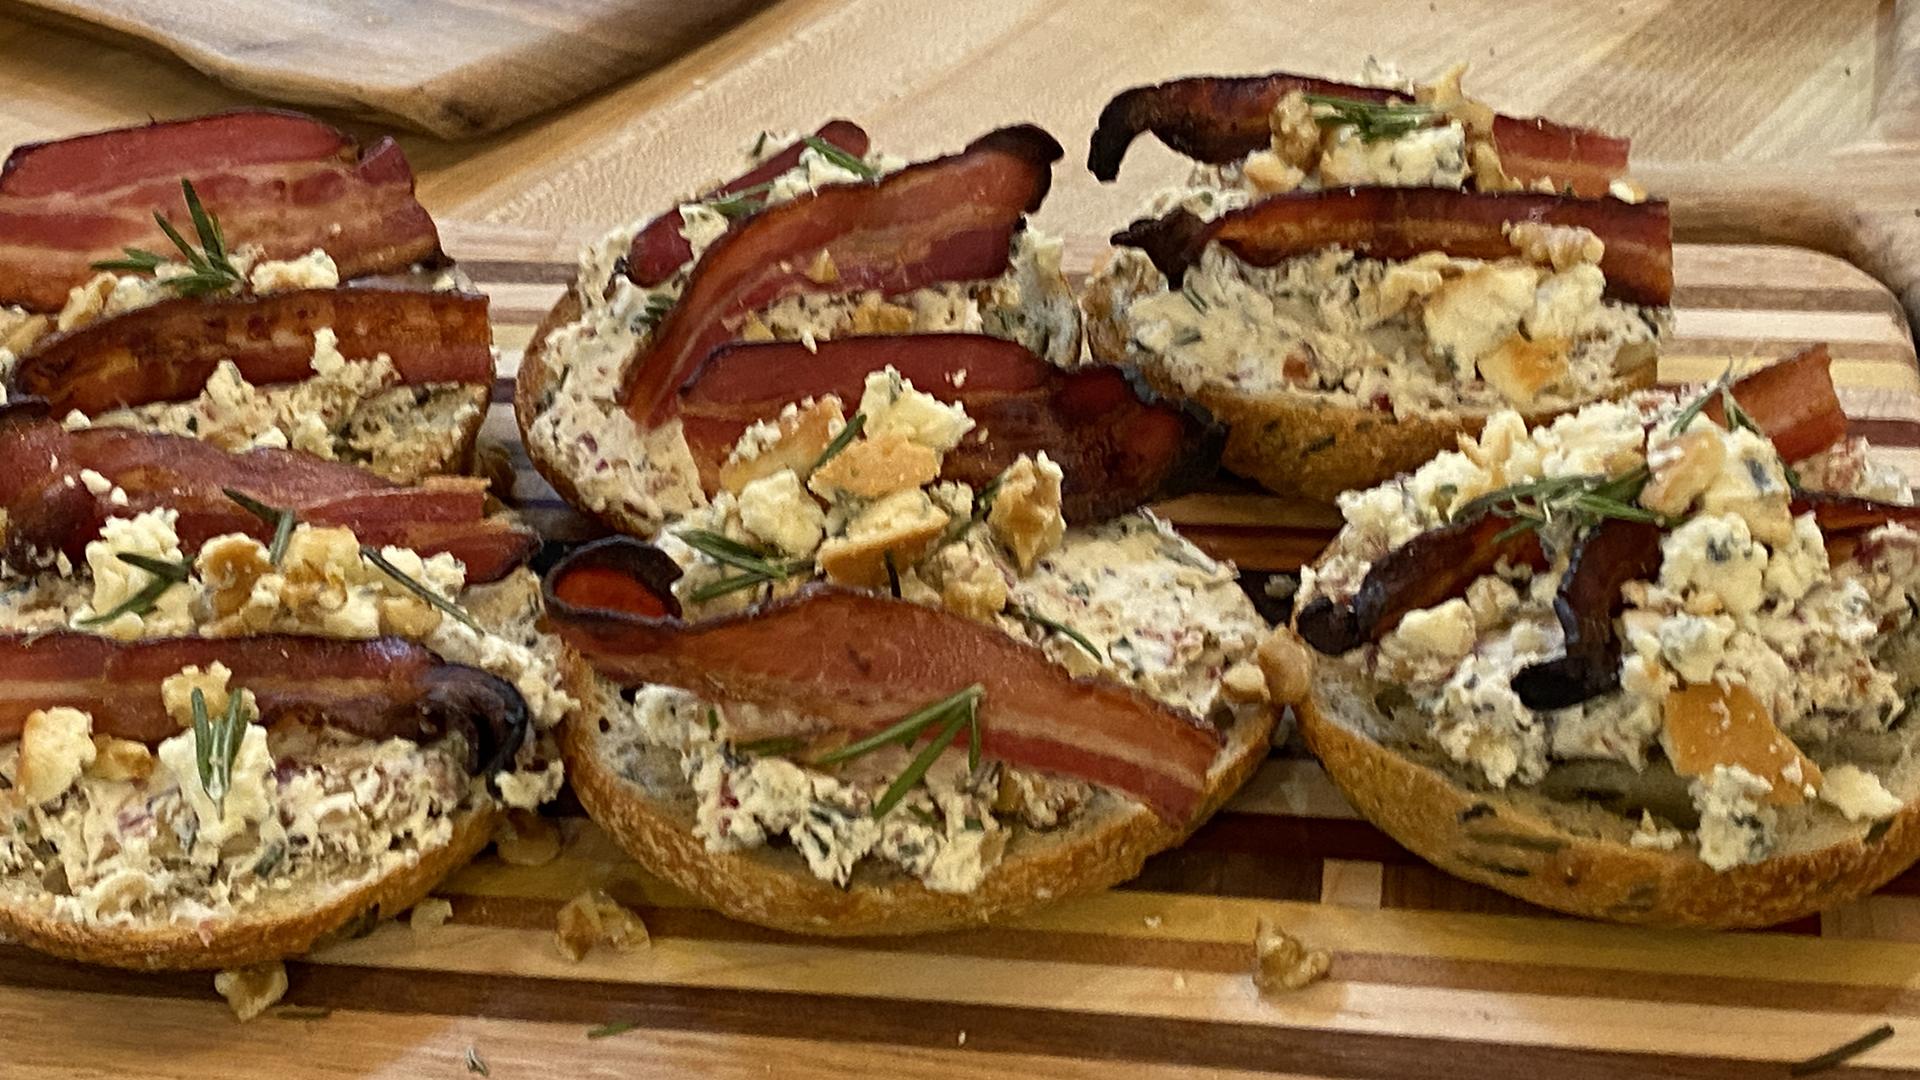 Blue Cream Cheese Bagels with Walnuts, Bacon and Rosemary | Bagel Lab